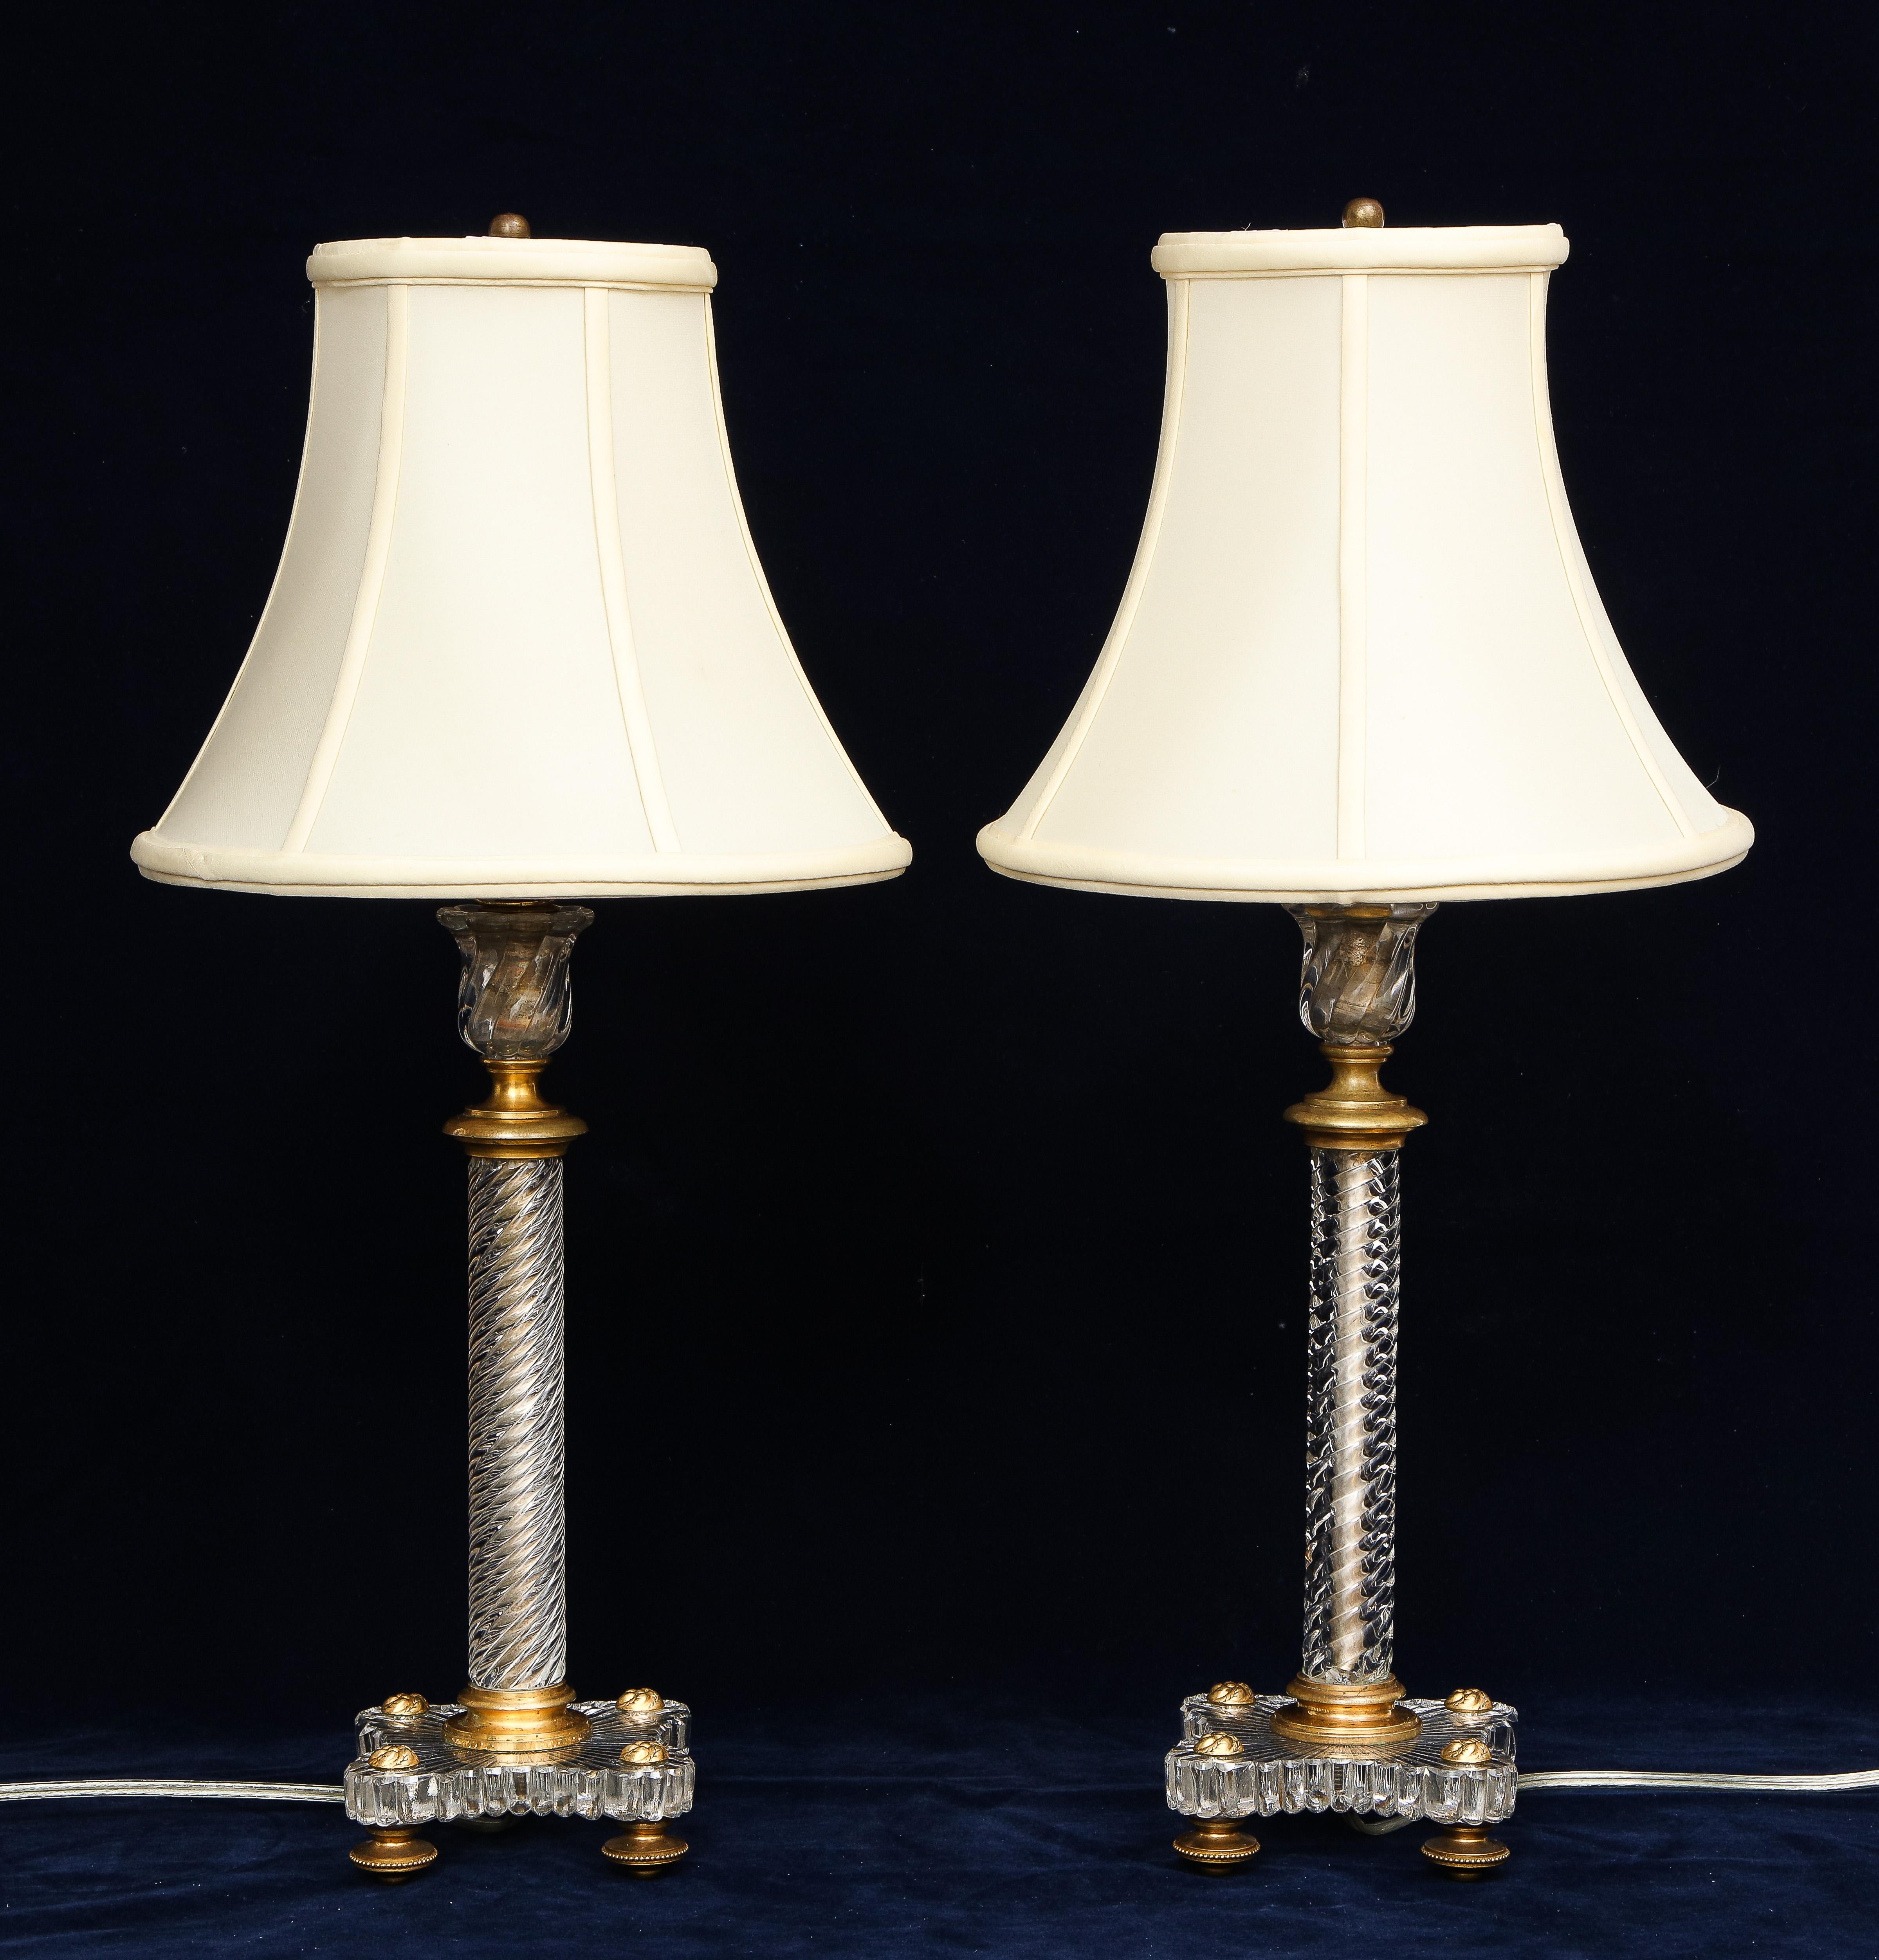 A Pair of 19th Century Louis XVI Style French Dore Bronze Mounted Baccarat Swirling Crystal Table Lamps.  Each piece is beautiful with the finest and most dense French Baccarat Crystal.  They have a wonderful swirling design and the base is